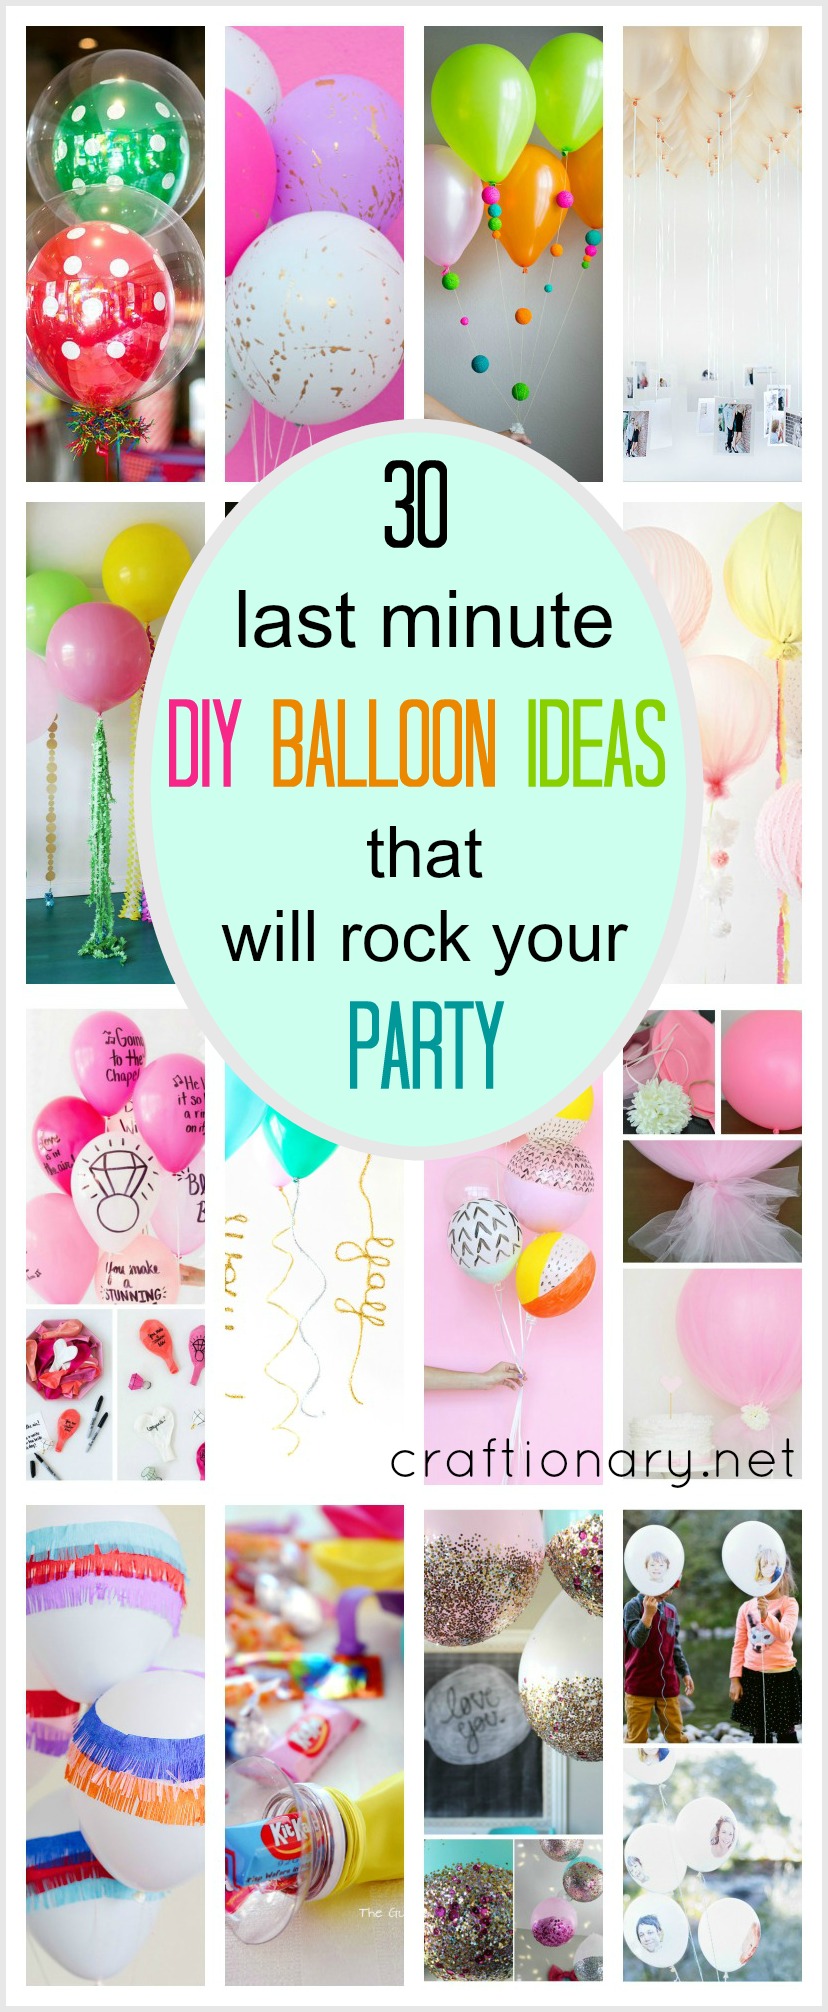 Balloon Arch and Party Decorations - Ace Party